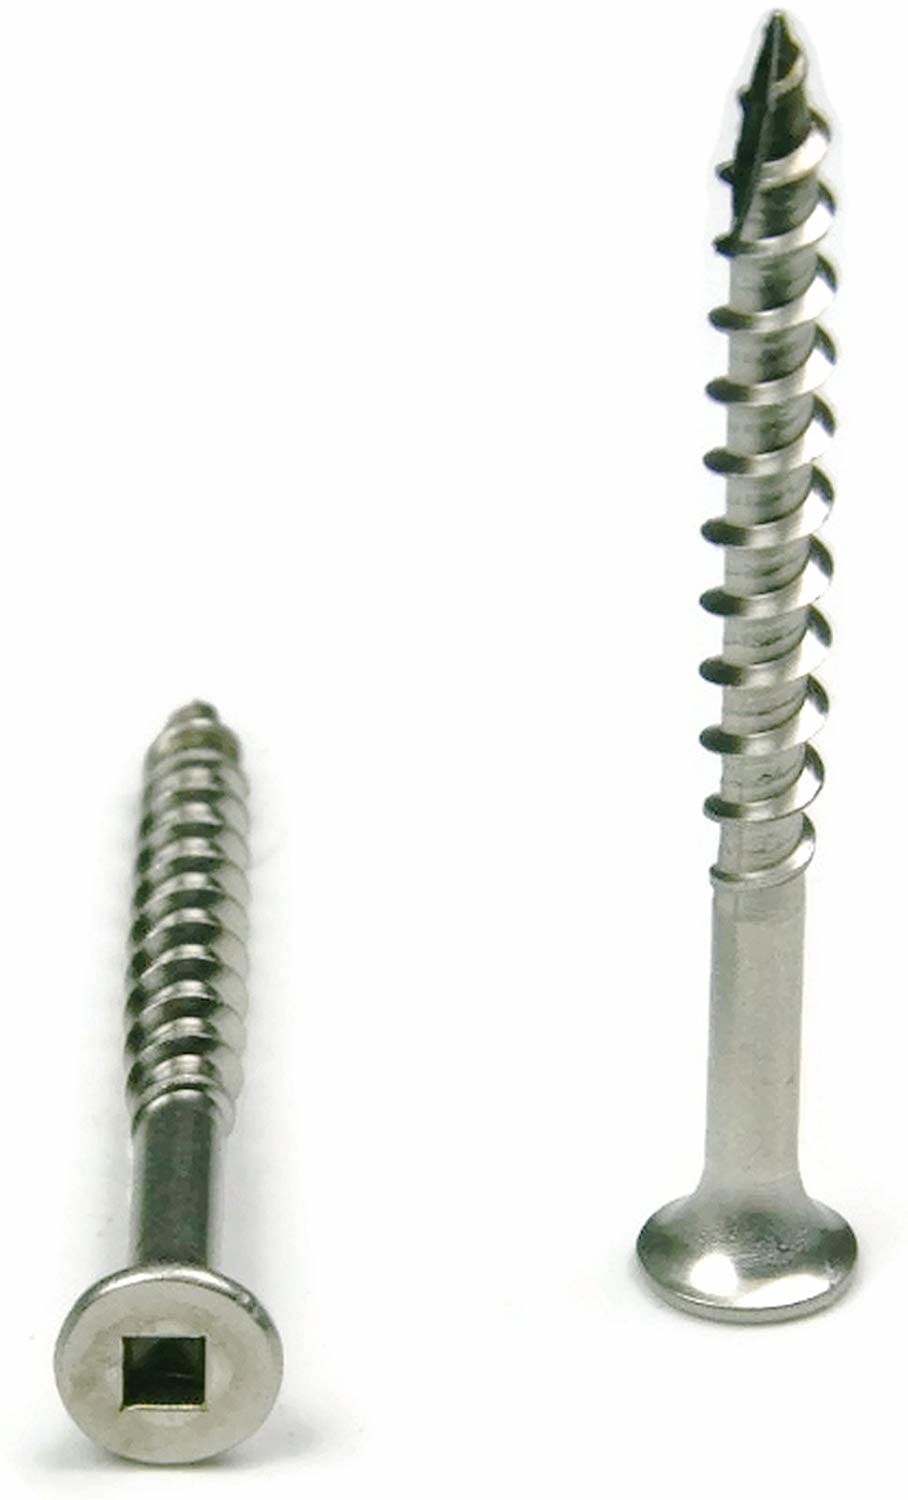 #10 x 2-1/2" Stainless Steel Wood Screw Square Drive, Bugle Head (Quantity: 500) Type 17 Wood Cutting Point, 1-3/4" of Thread Length, #10 Screw Diameter, 2-1/2" Screw Length - image 1 of 1